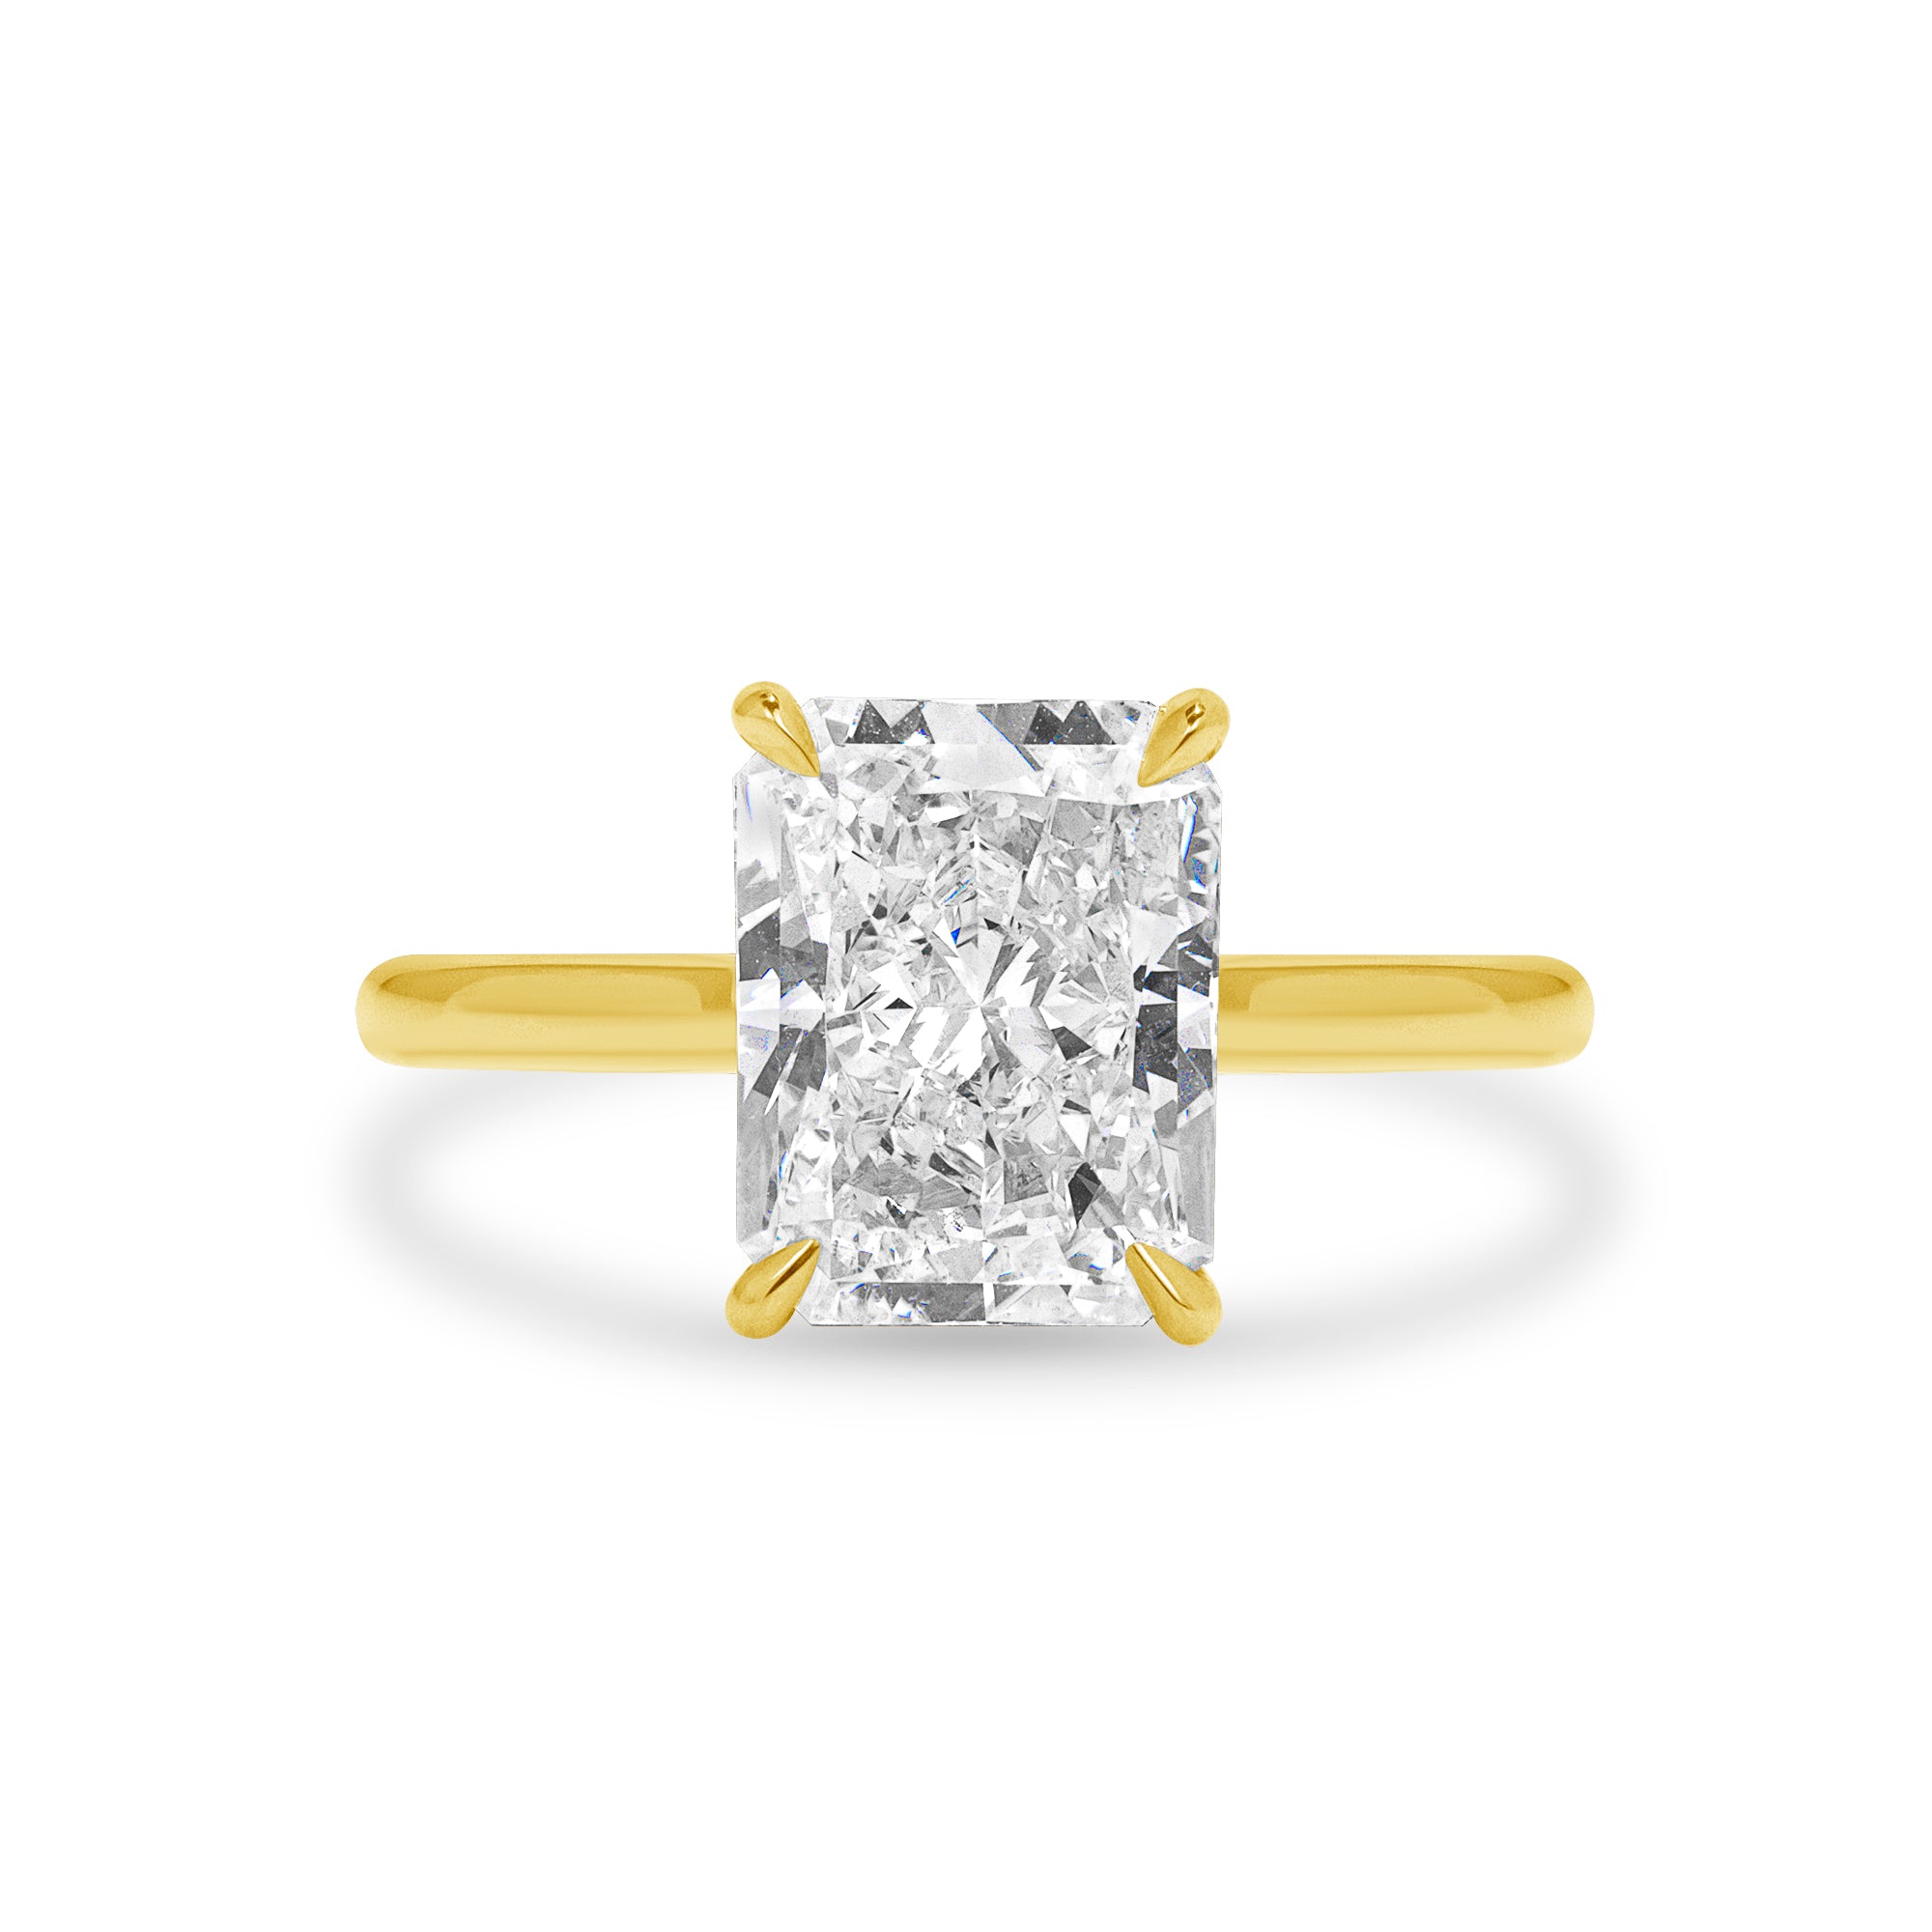 3.14ct Radiant Cut Diamond Hidden Halo Ring in 18k Yellow Gold Band, GIA Certified